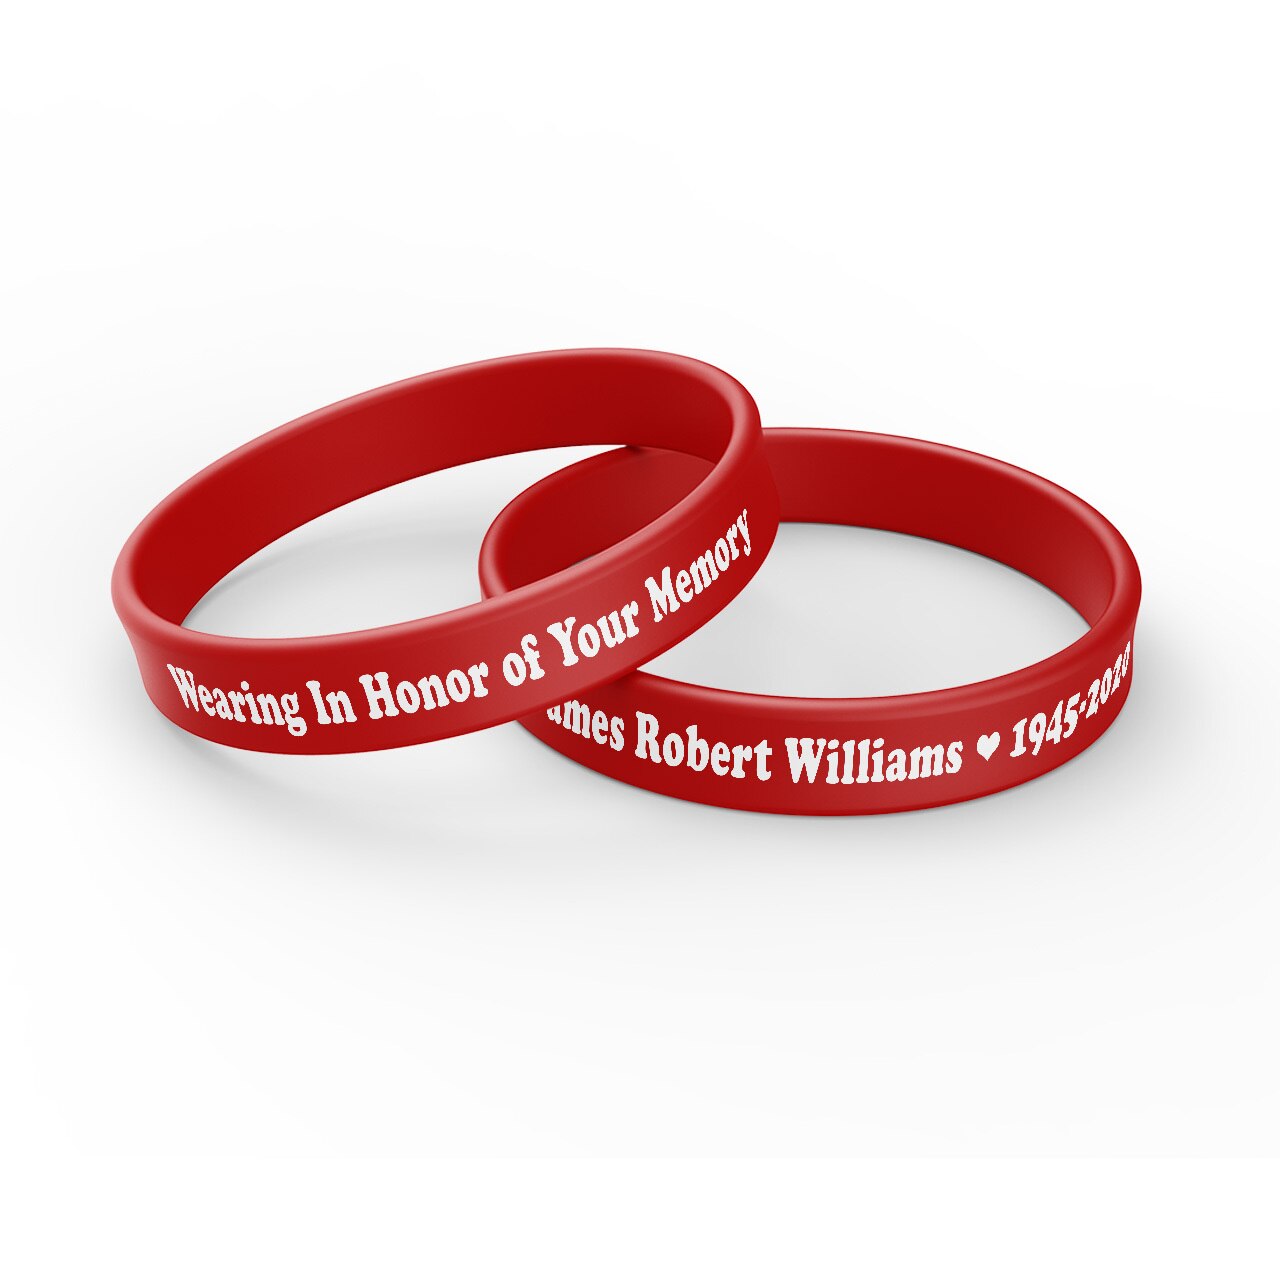 Personalized Silicone Wristbands,Custom Rubber Bracelets,Customized Bulk  1/5/10/50/100/200 for Gifts,Events,Motivation,Awareness,4 Sizes 13 Colors  20 Icons : Amazon.ca: Office Products